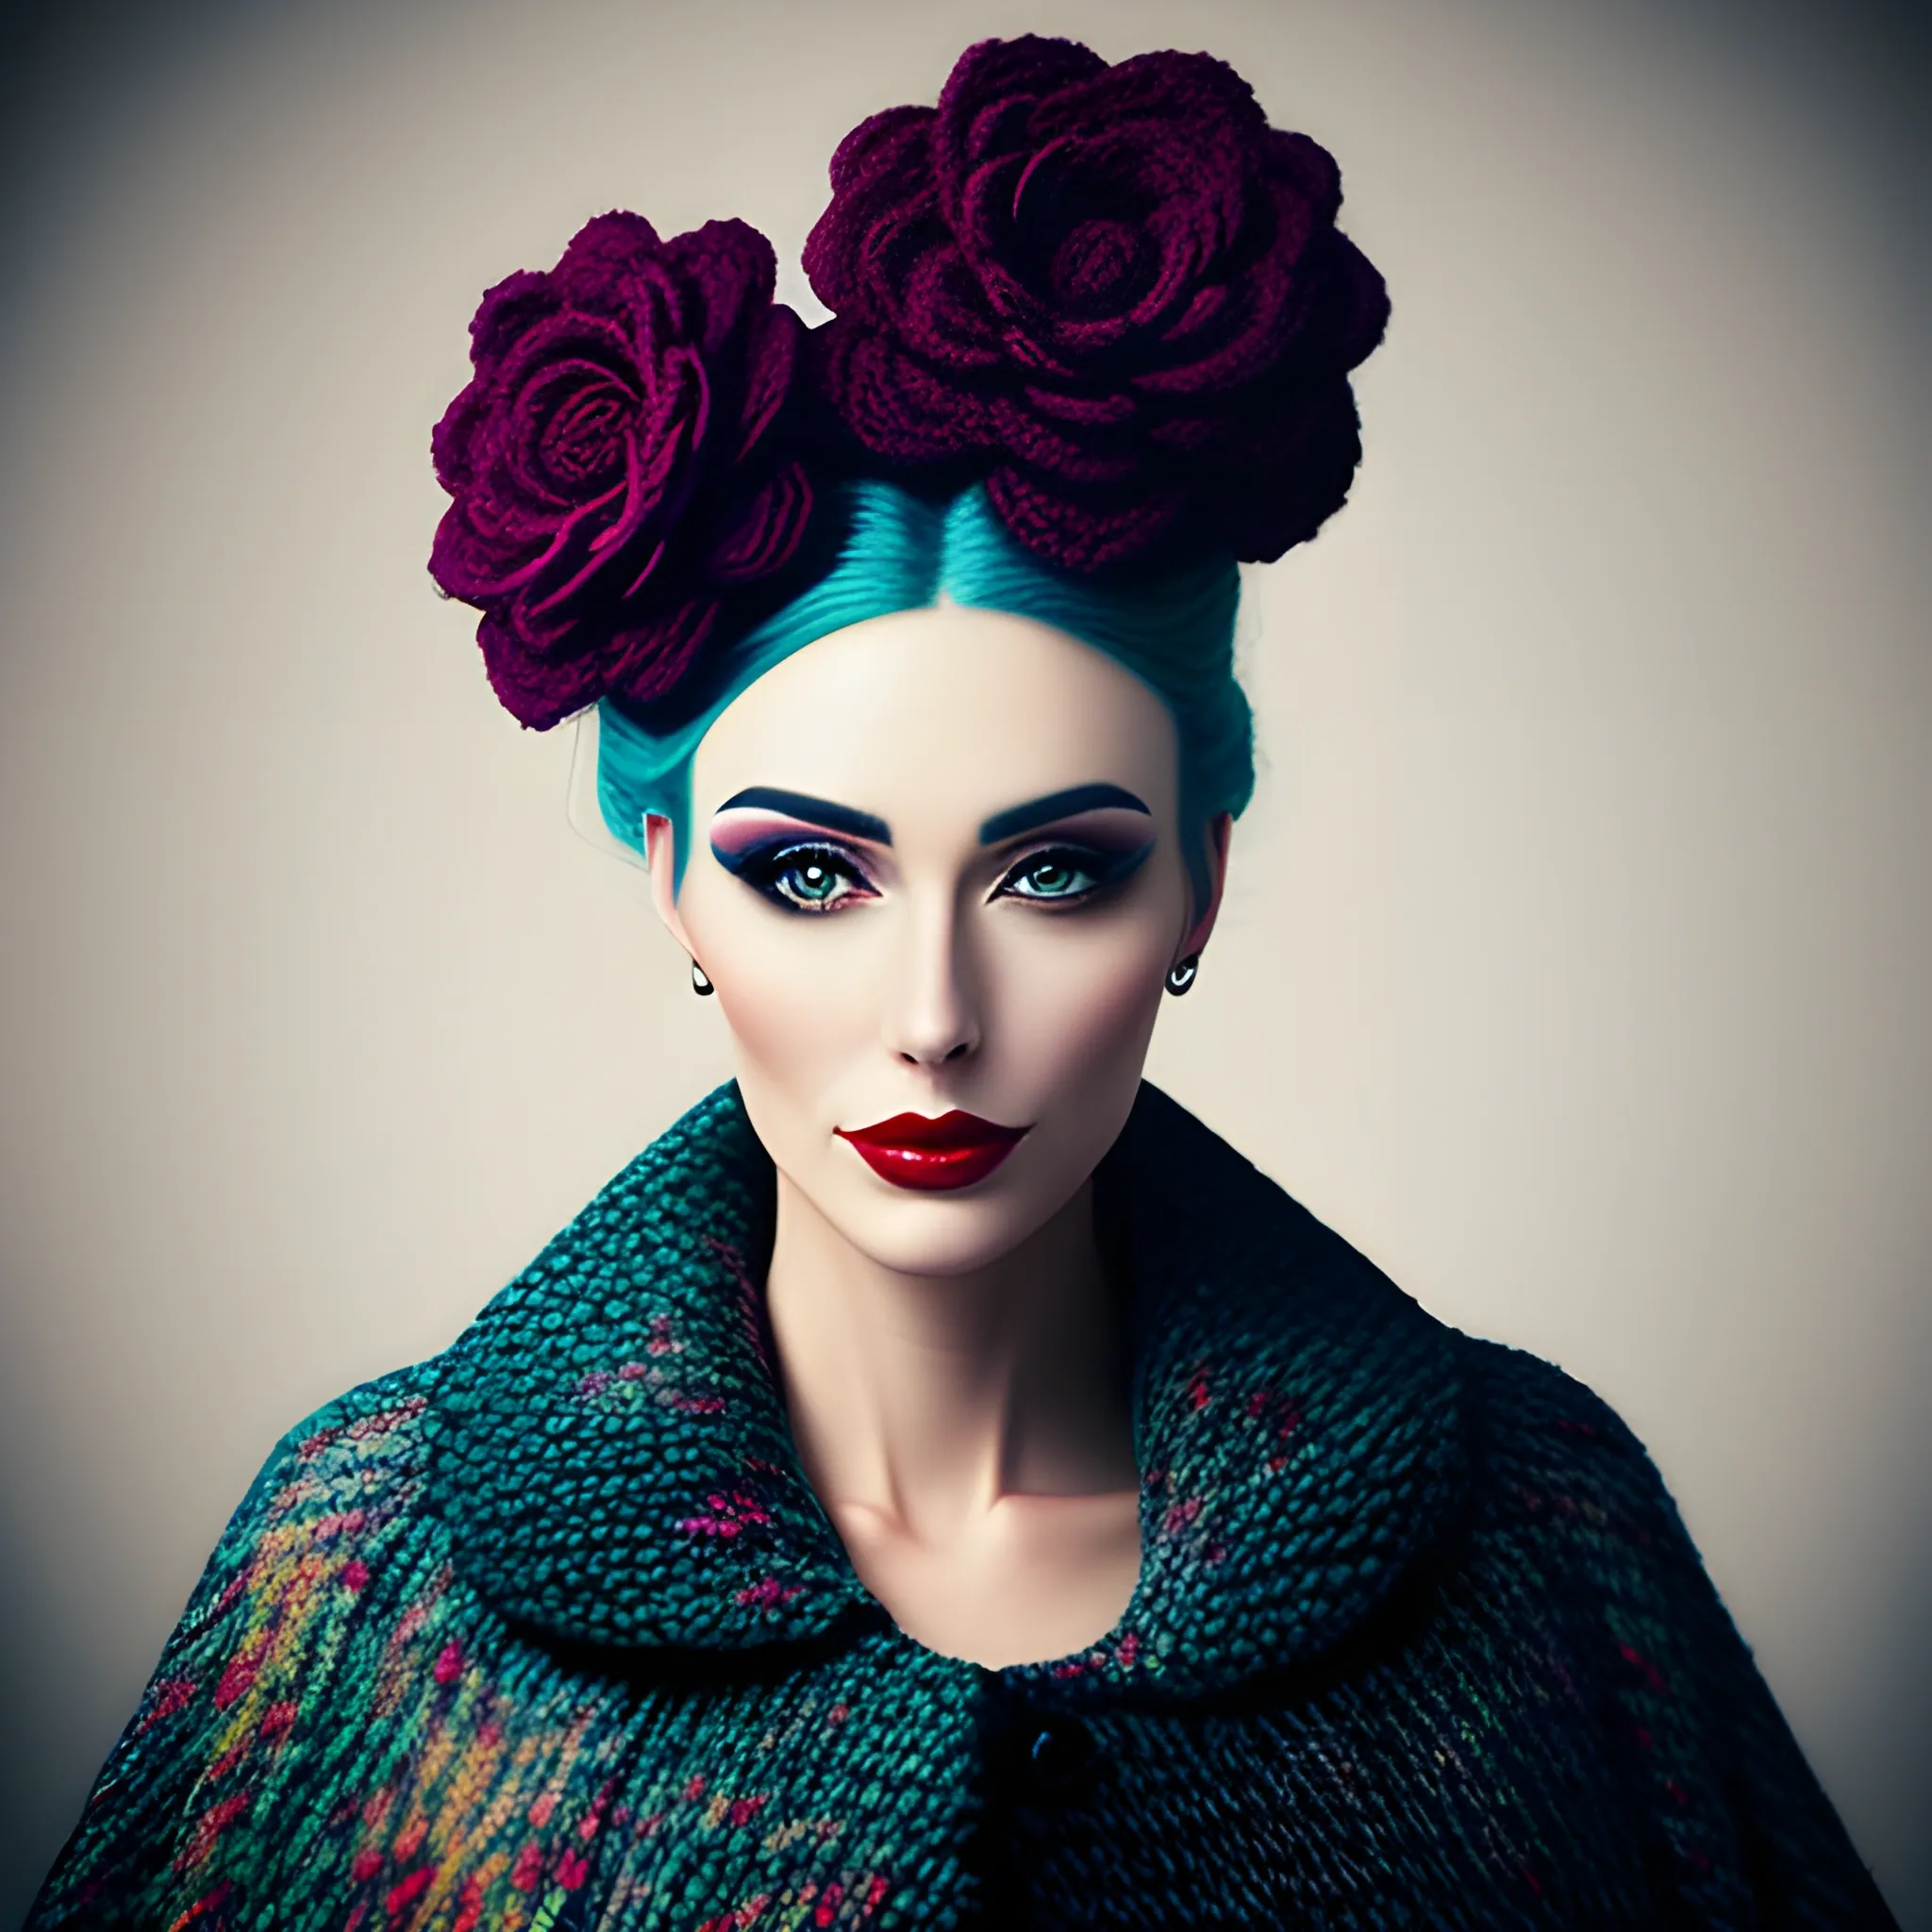 Portrait of a beautiful girl in a very large wool coat knitted with an abstract pattern and a large flower on her head, photography style